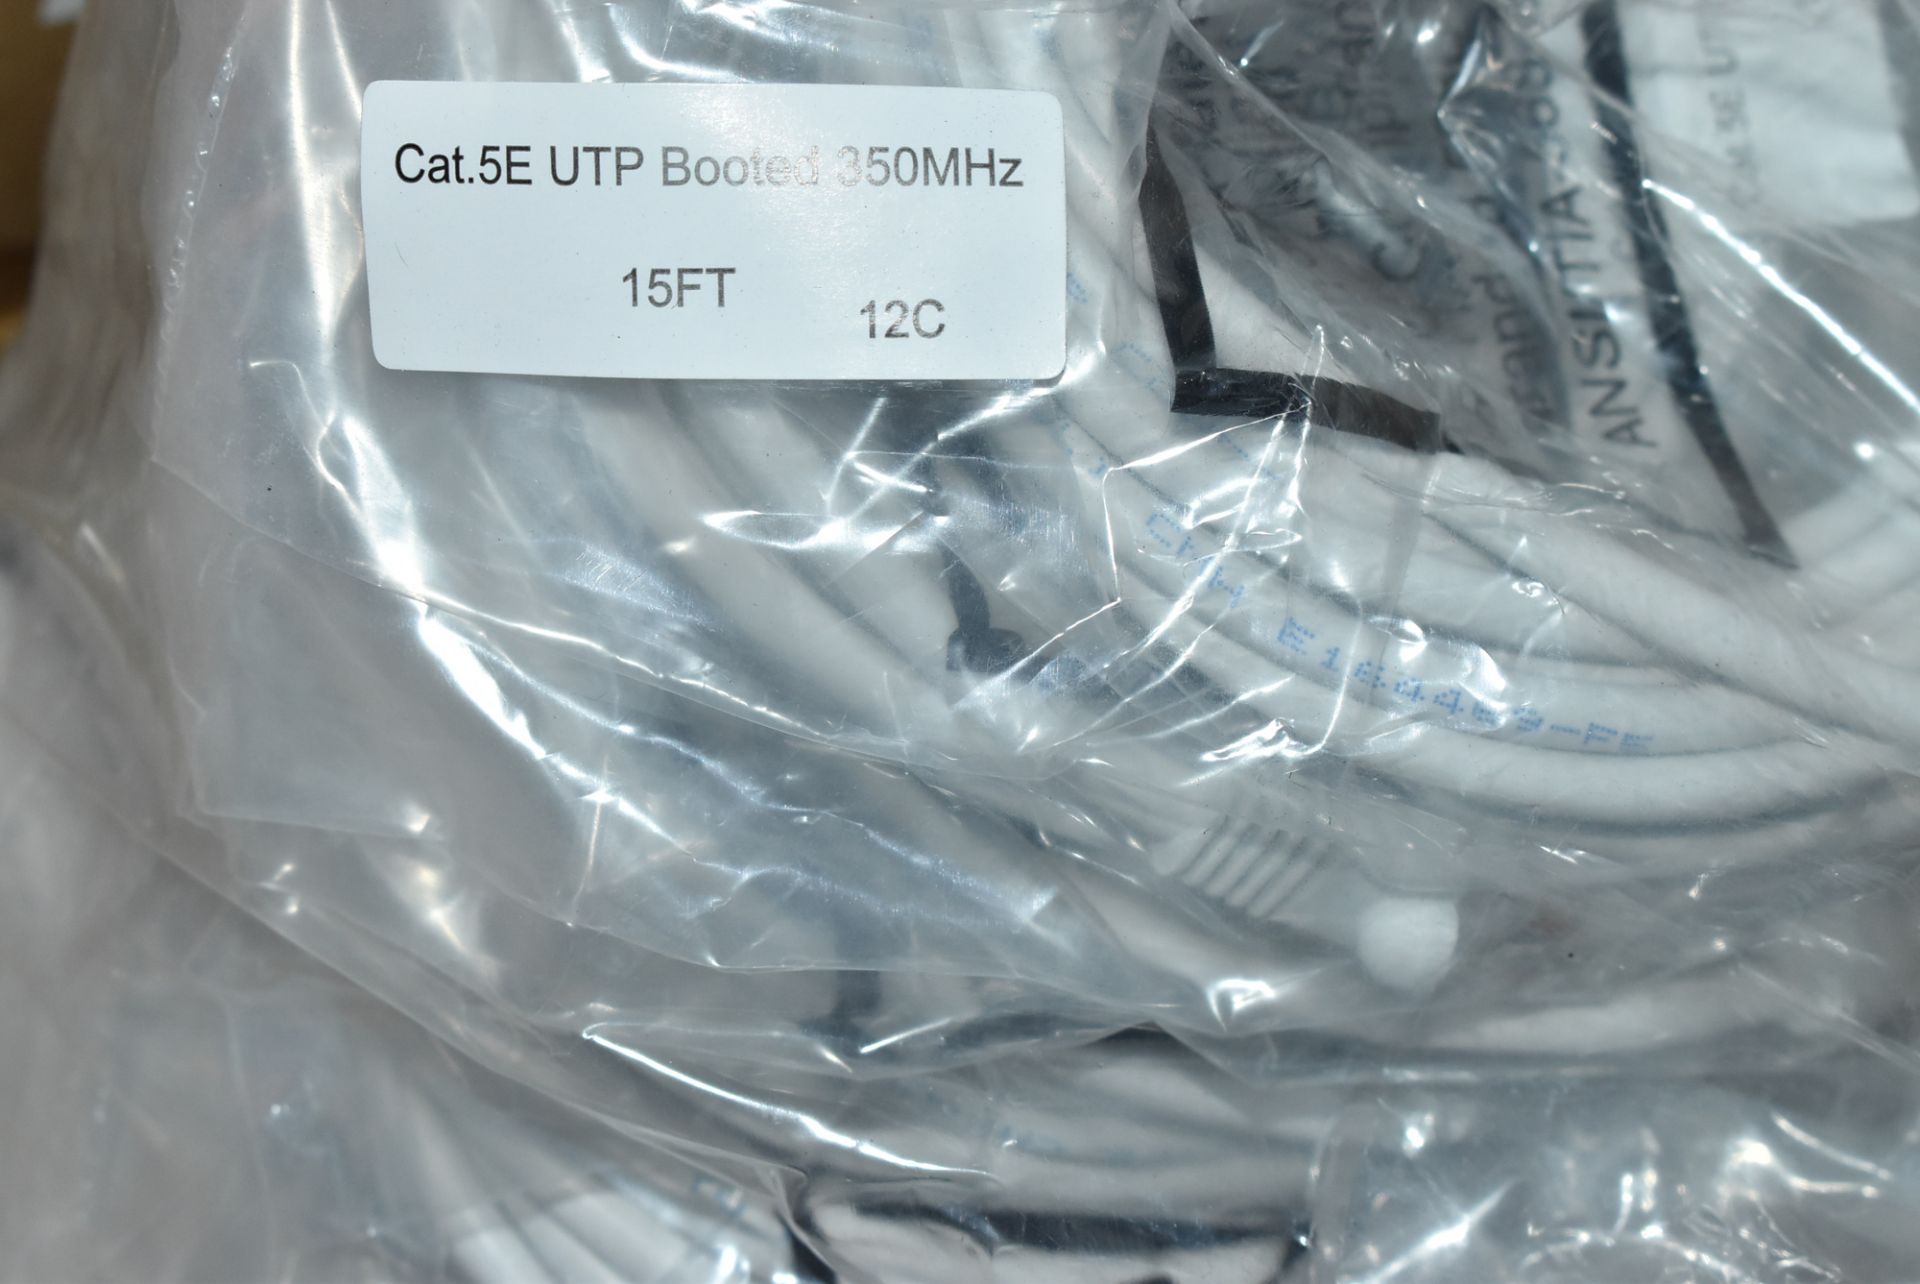 LOT/ PALLET OF 15FT CAT 5E UTP BOTTED 350MHZ ETHERNET PATCH CABLES (LOCATED AT 963 CHEMIN BETHANY, - Image 2 of 3